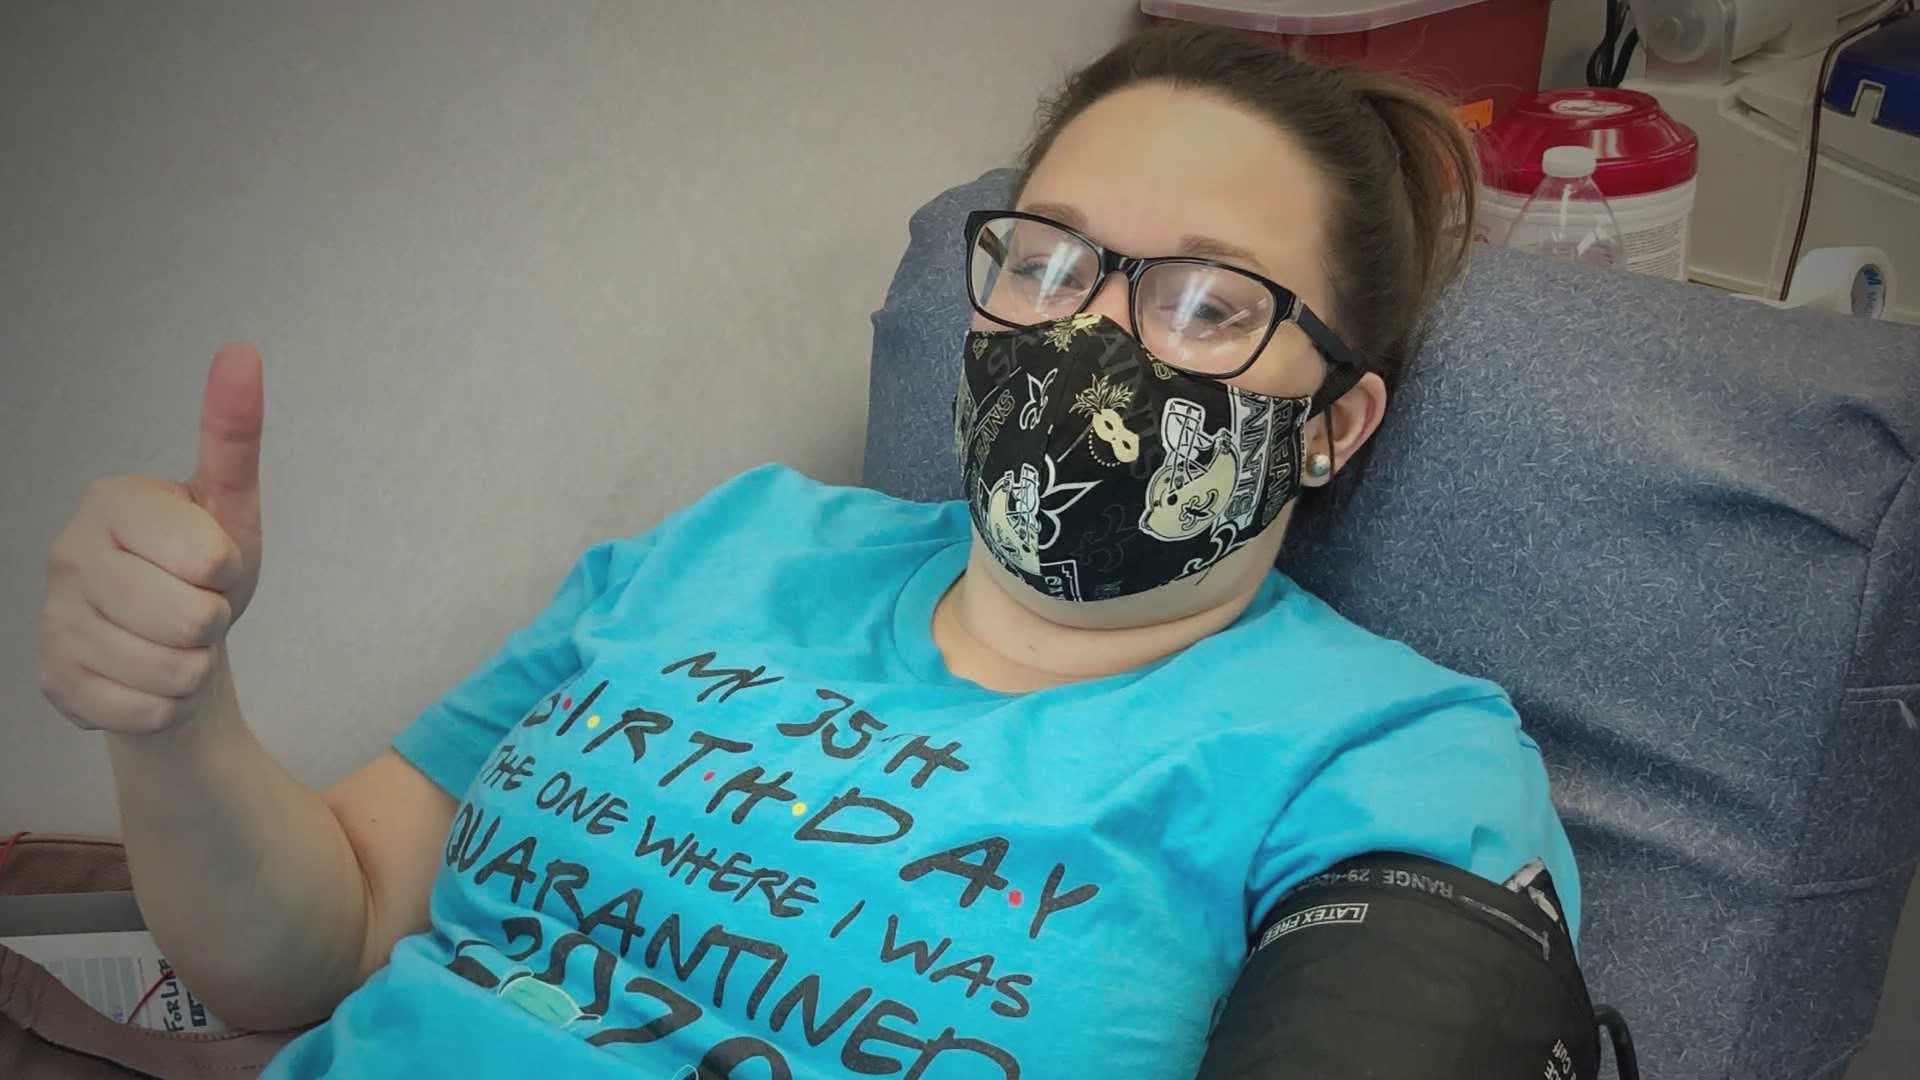 "I hope other survivors out there will also consider donating to help save lives," said 35-year-old Elizabeth Bolt, who donated her plasma this past weekend.